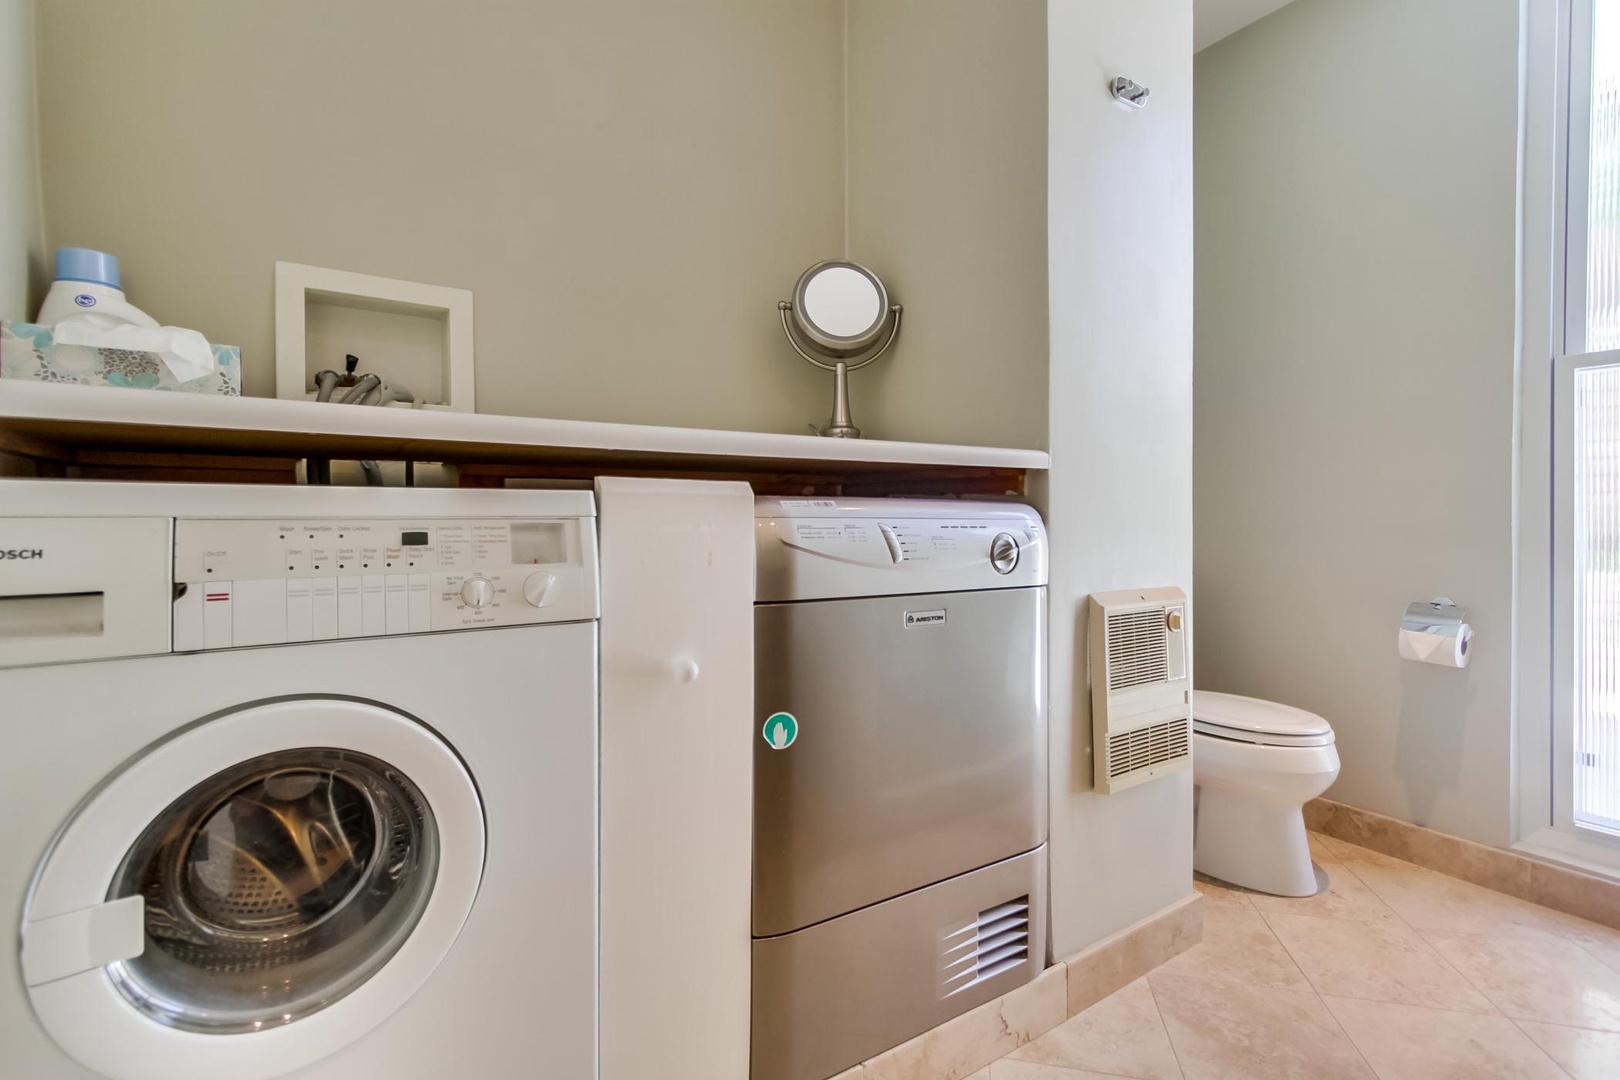 Washer and dryer readily available